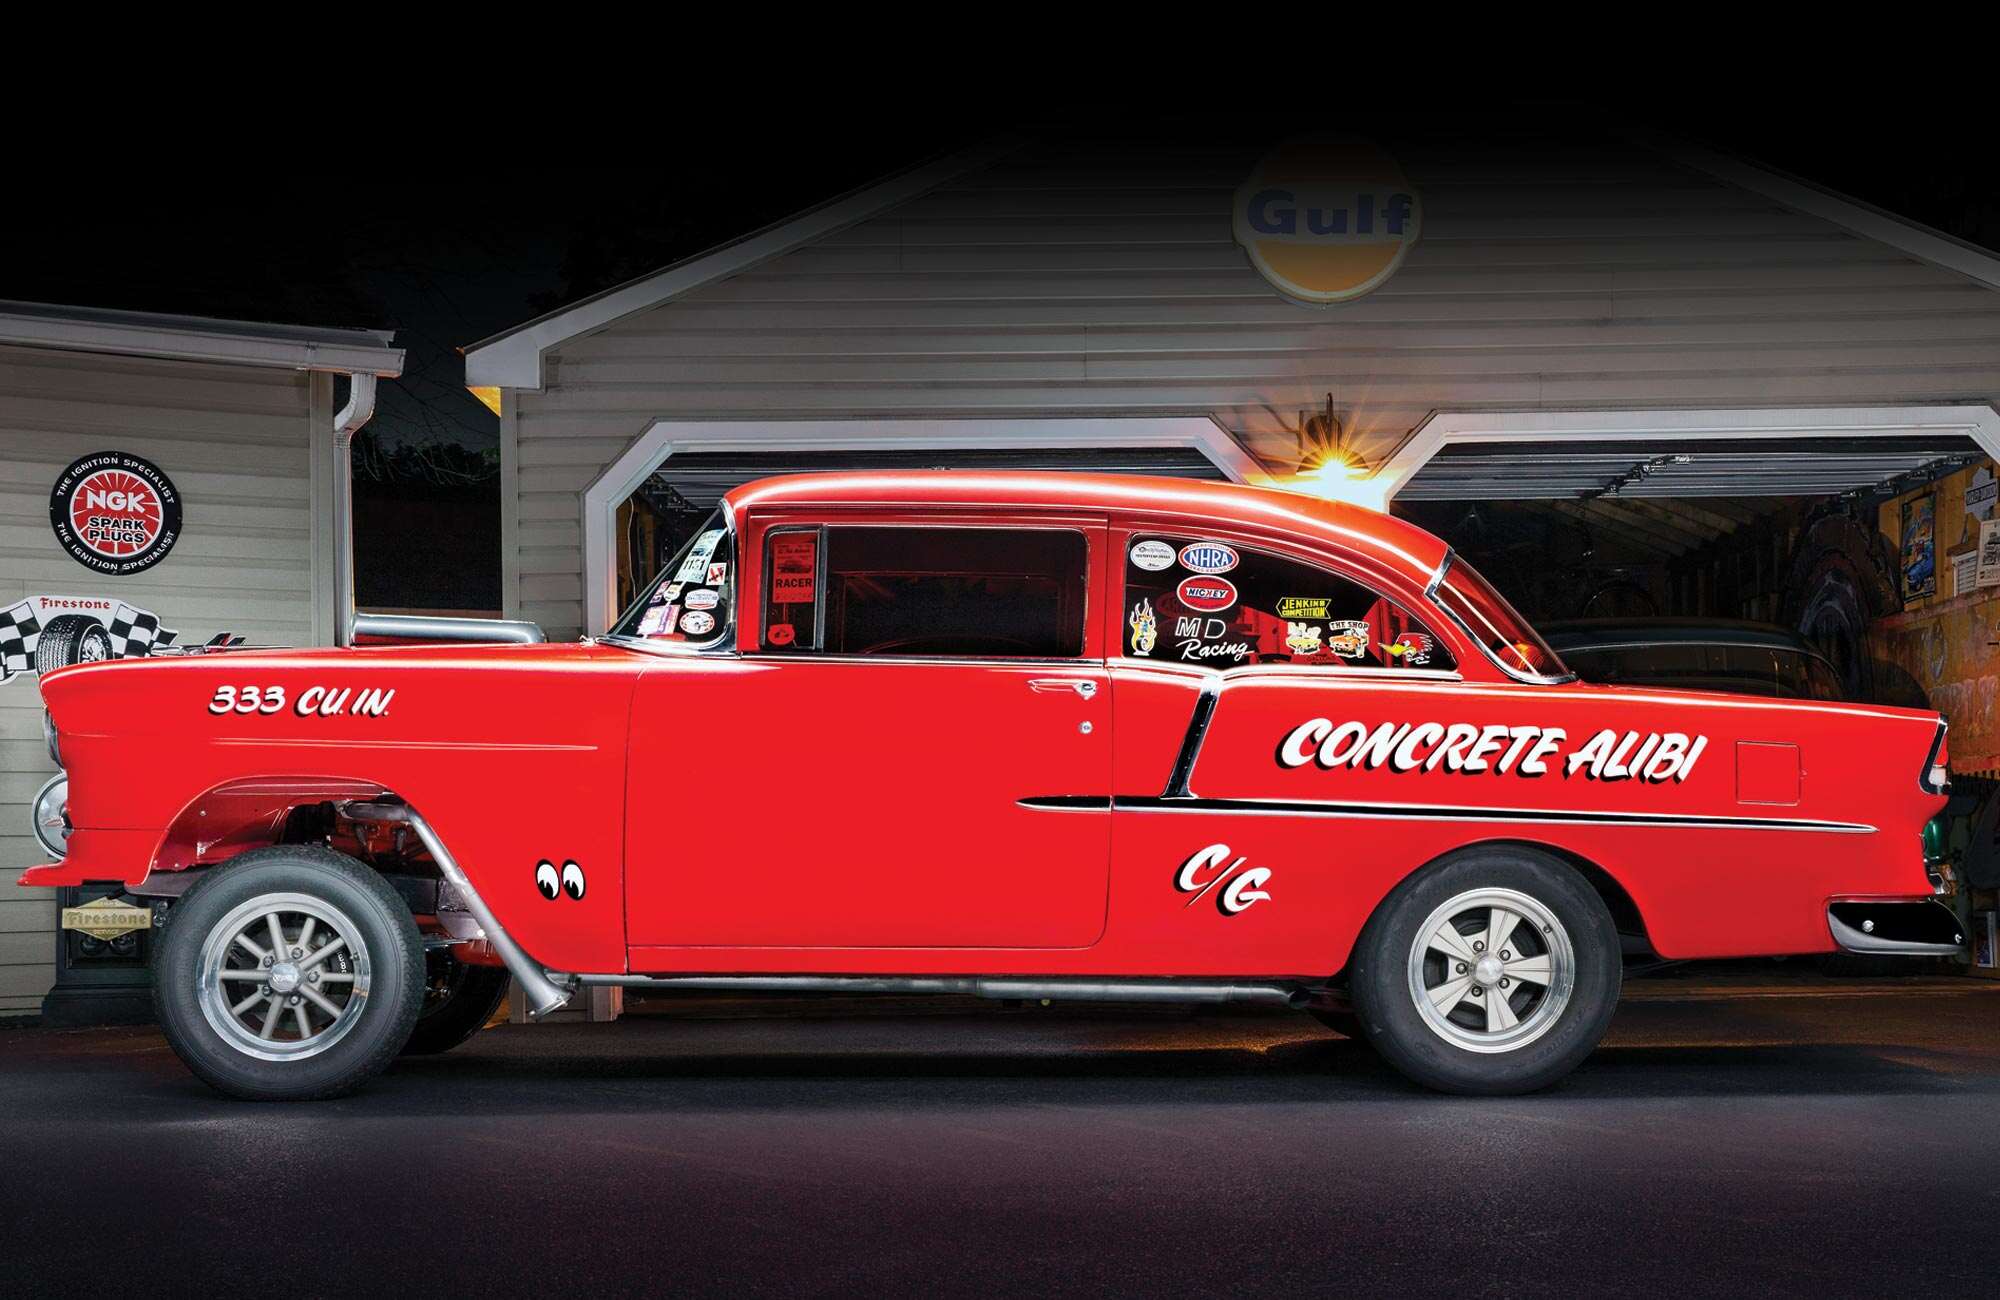 driver's side profile of the '55 Chevy gasser, with various vintage stickers on the windows and graphics on the body including the wording "Concrete Alibi"